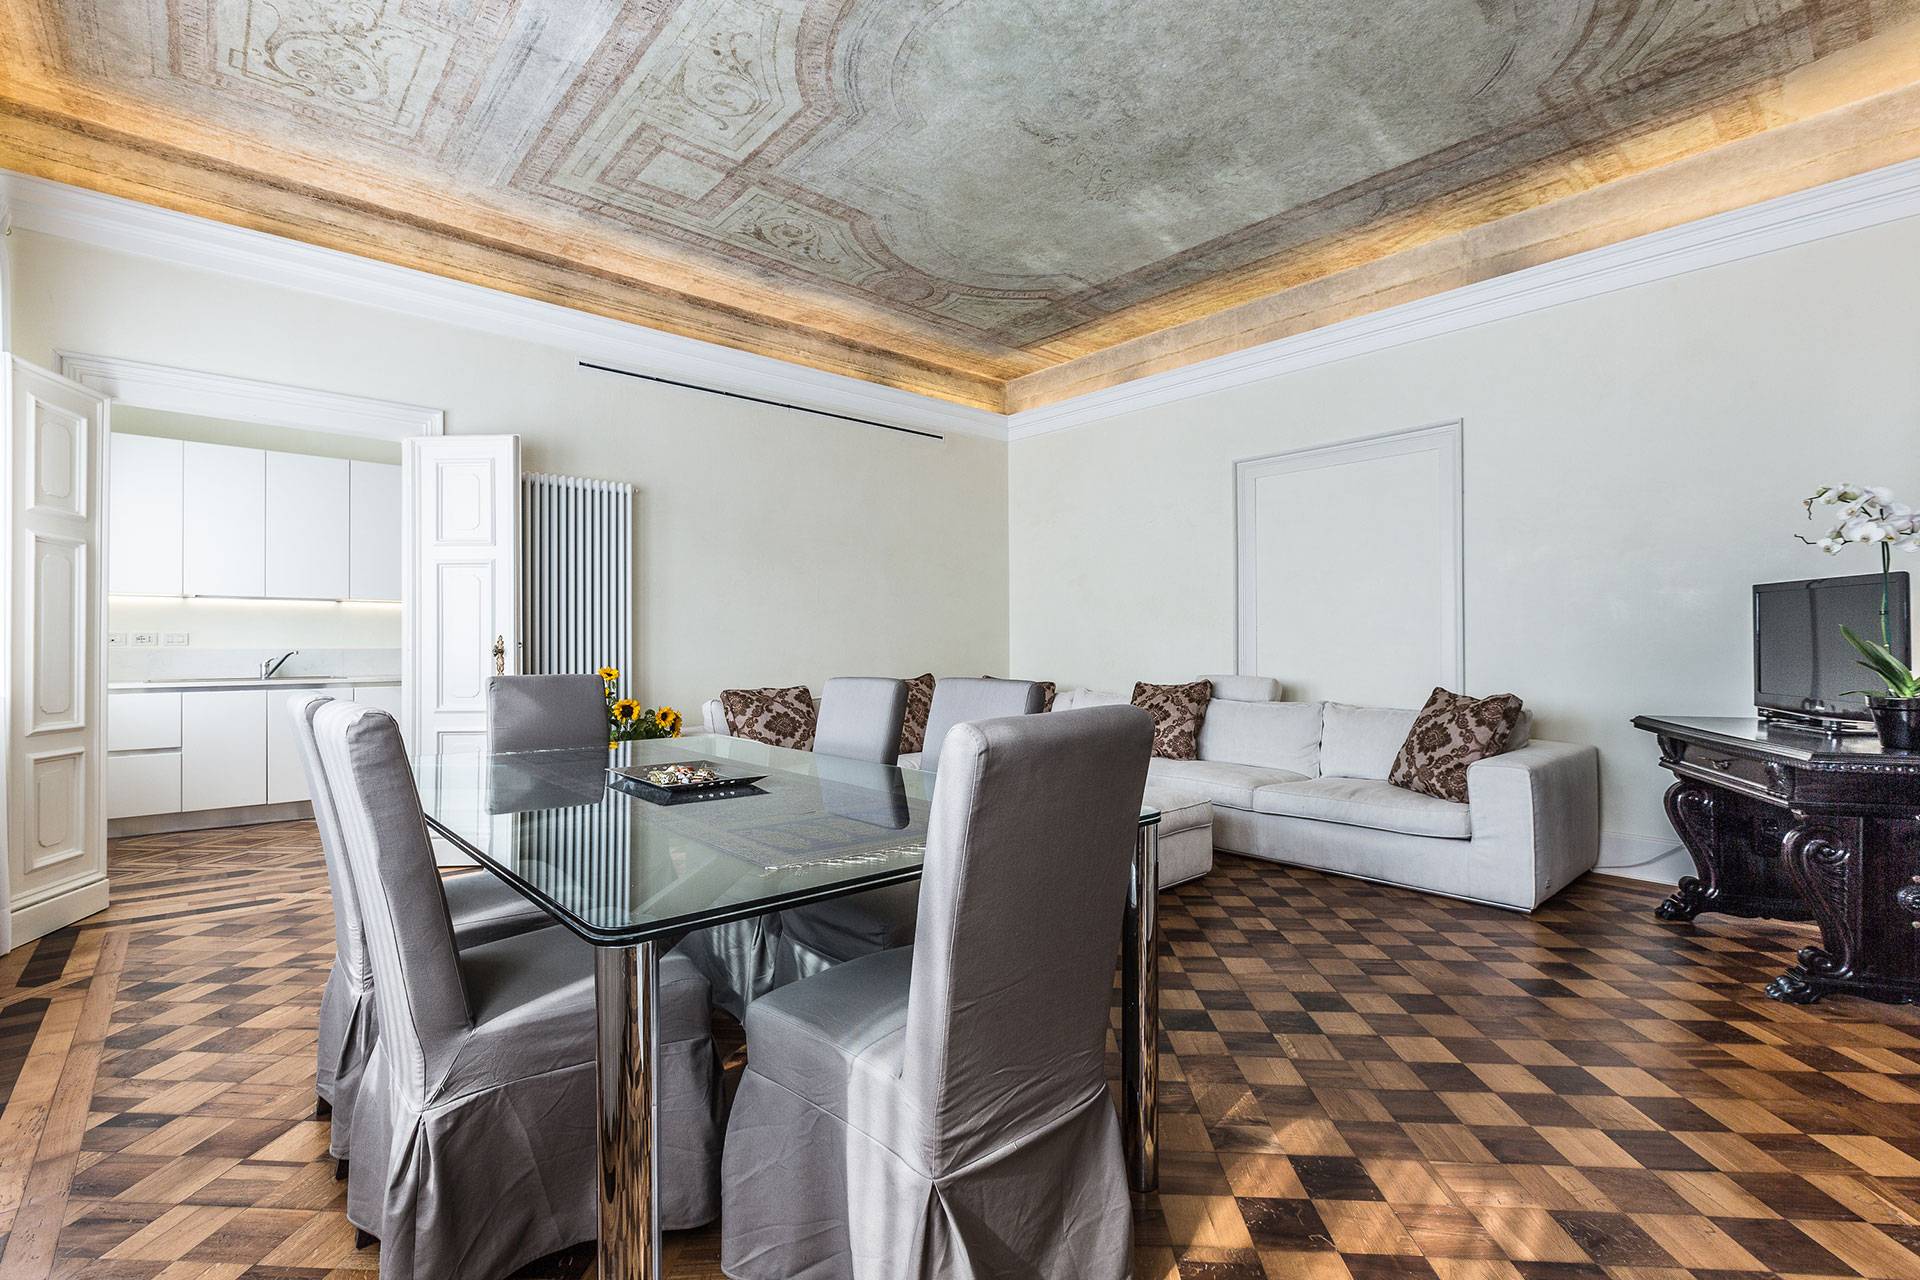 antique partuet flooring and original frescoed ceiling confer a unique charm to the ambience